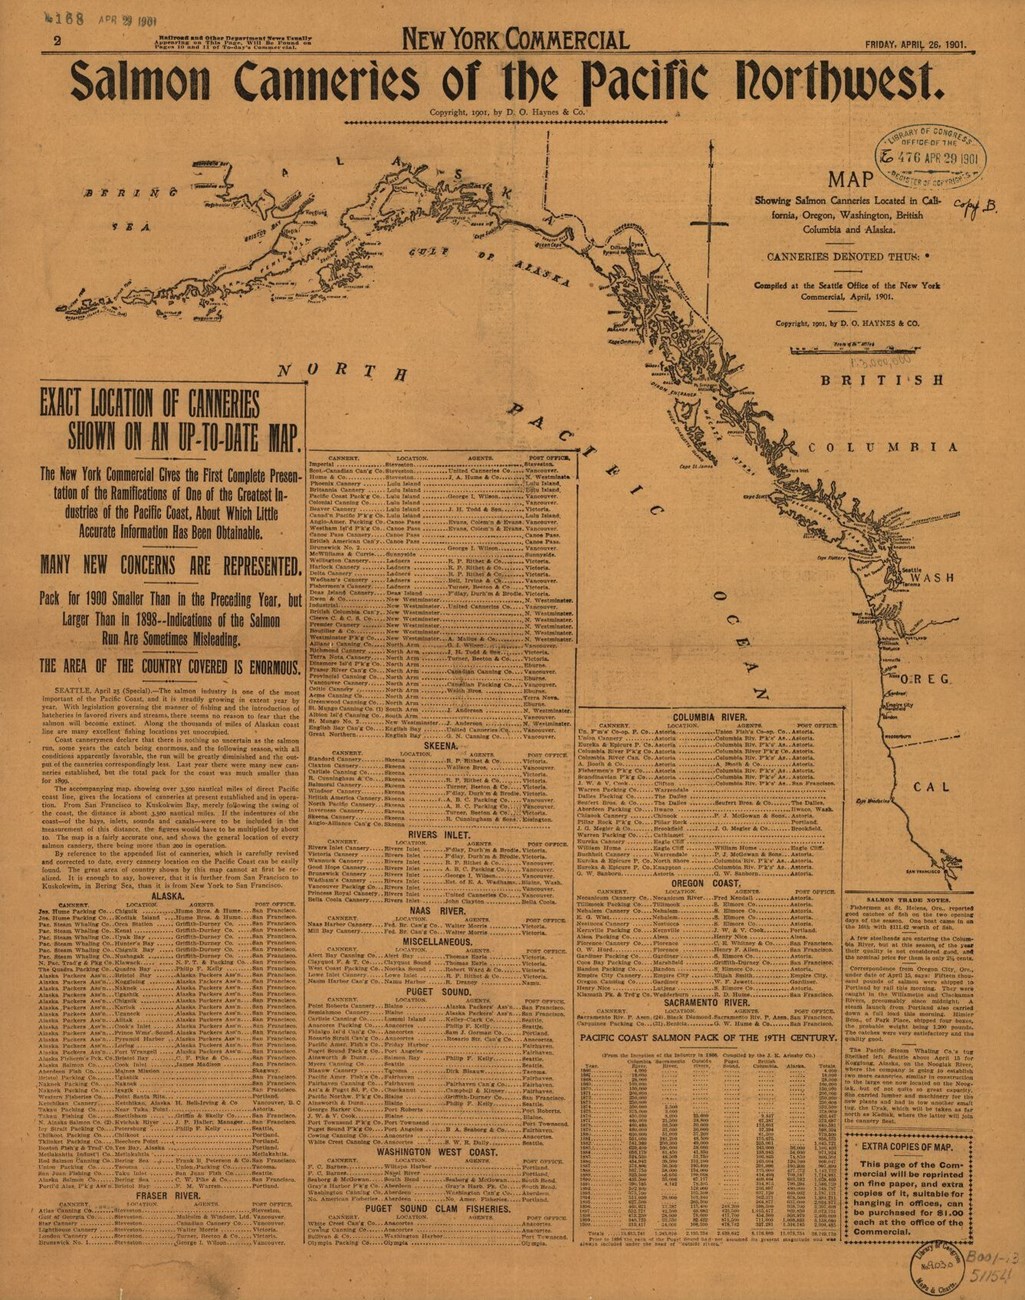 1901 map and list of "Salmon Canneries of the Pacific Northwest" on newsprint,